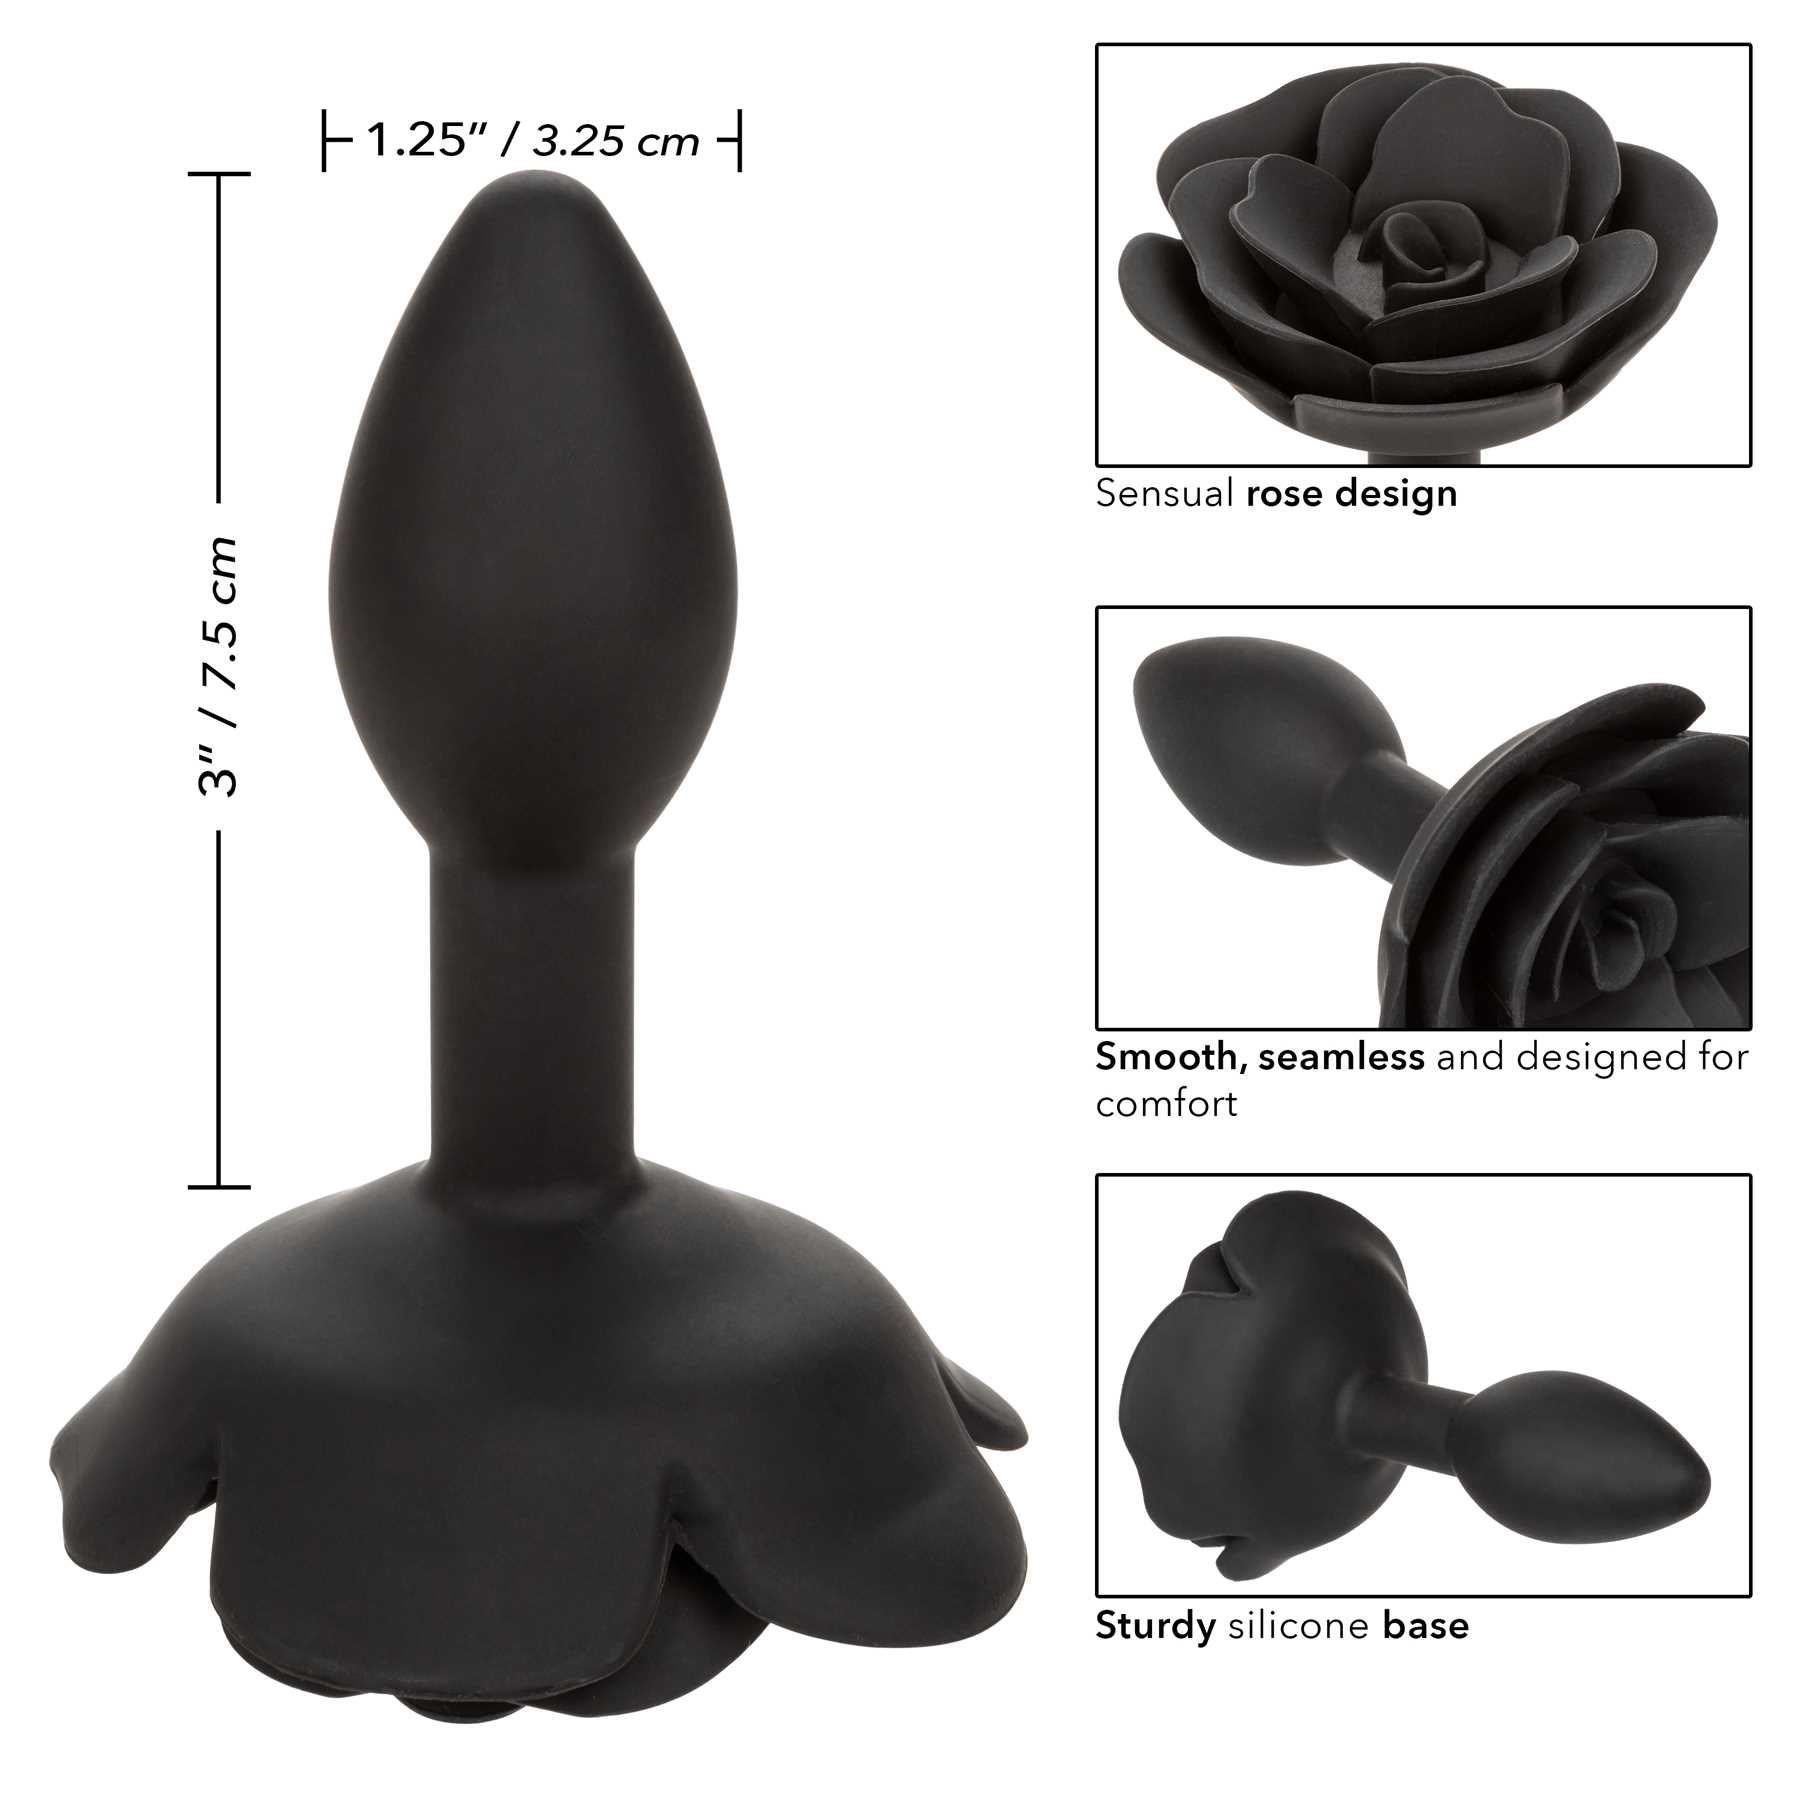 Forbidden Small Rose Anal Plug dimensions and feature call out sheet